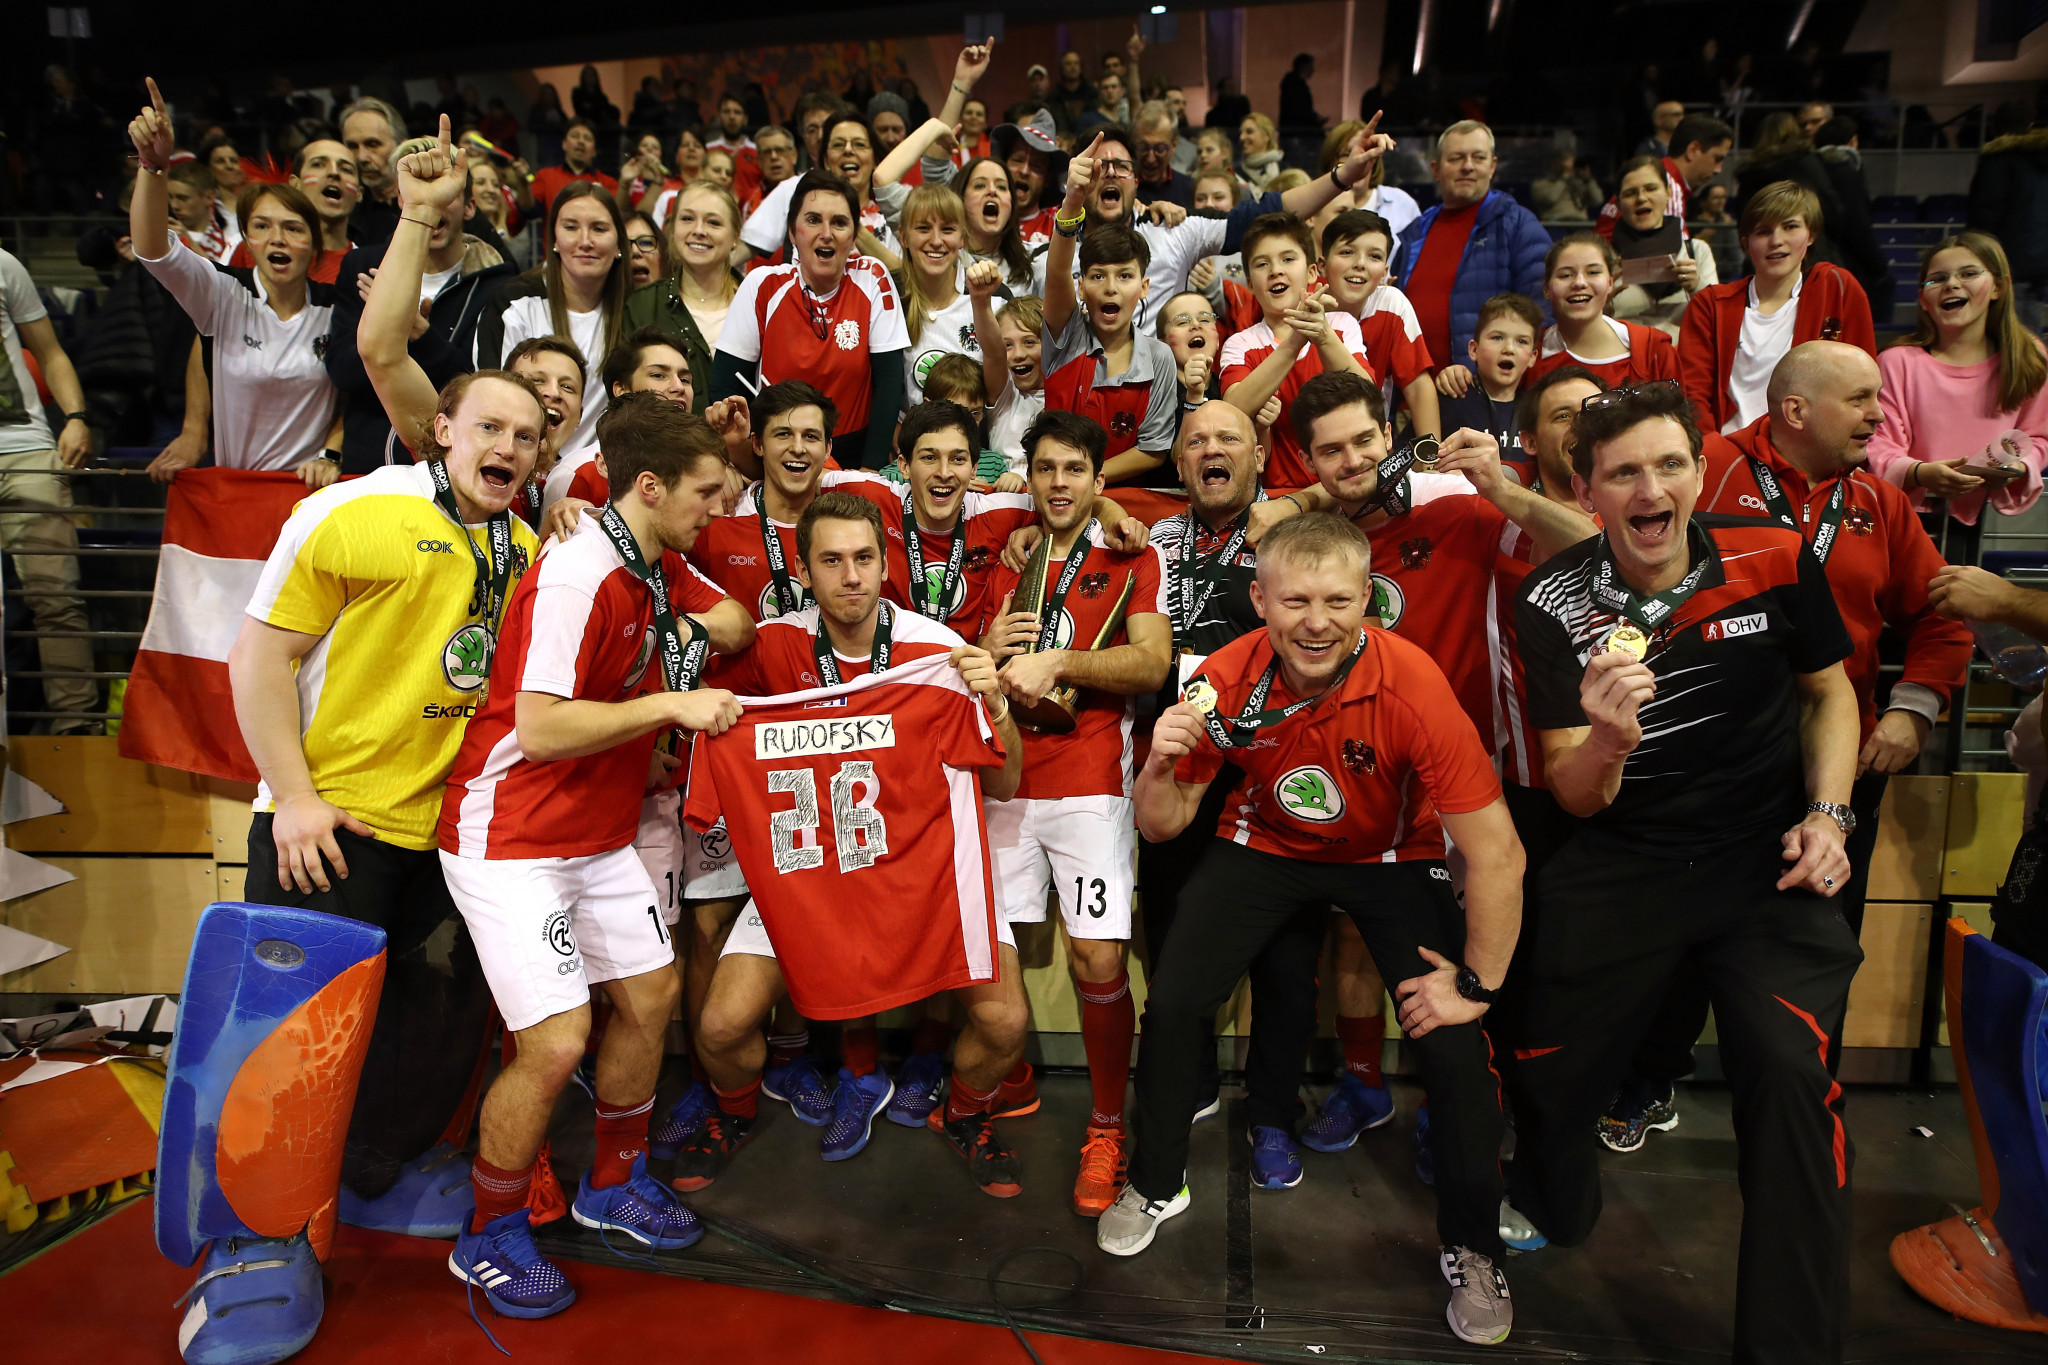 Austria celebrate after winning the 2018 Indoor Hockey World Cup in Berlin with victory over hosts Germany ©Getty Images